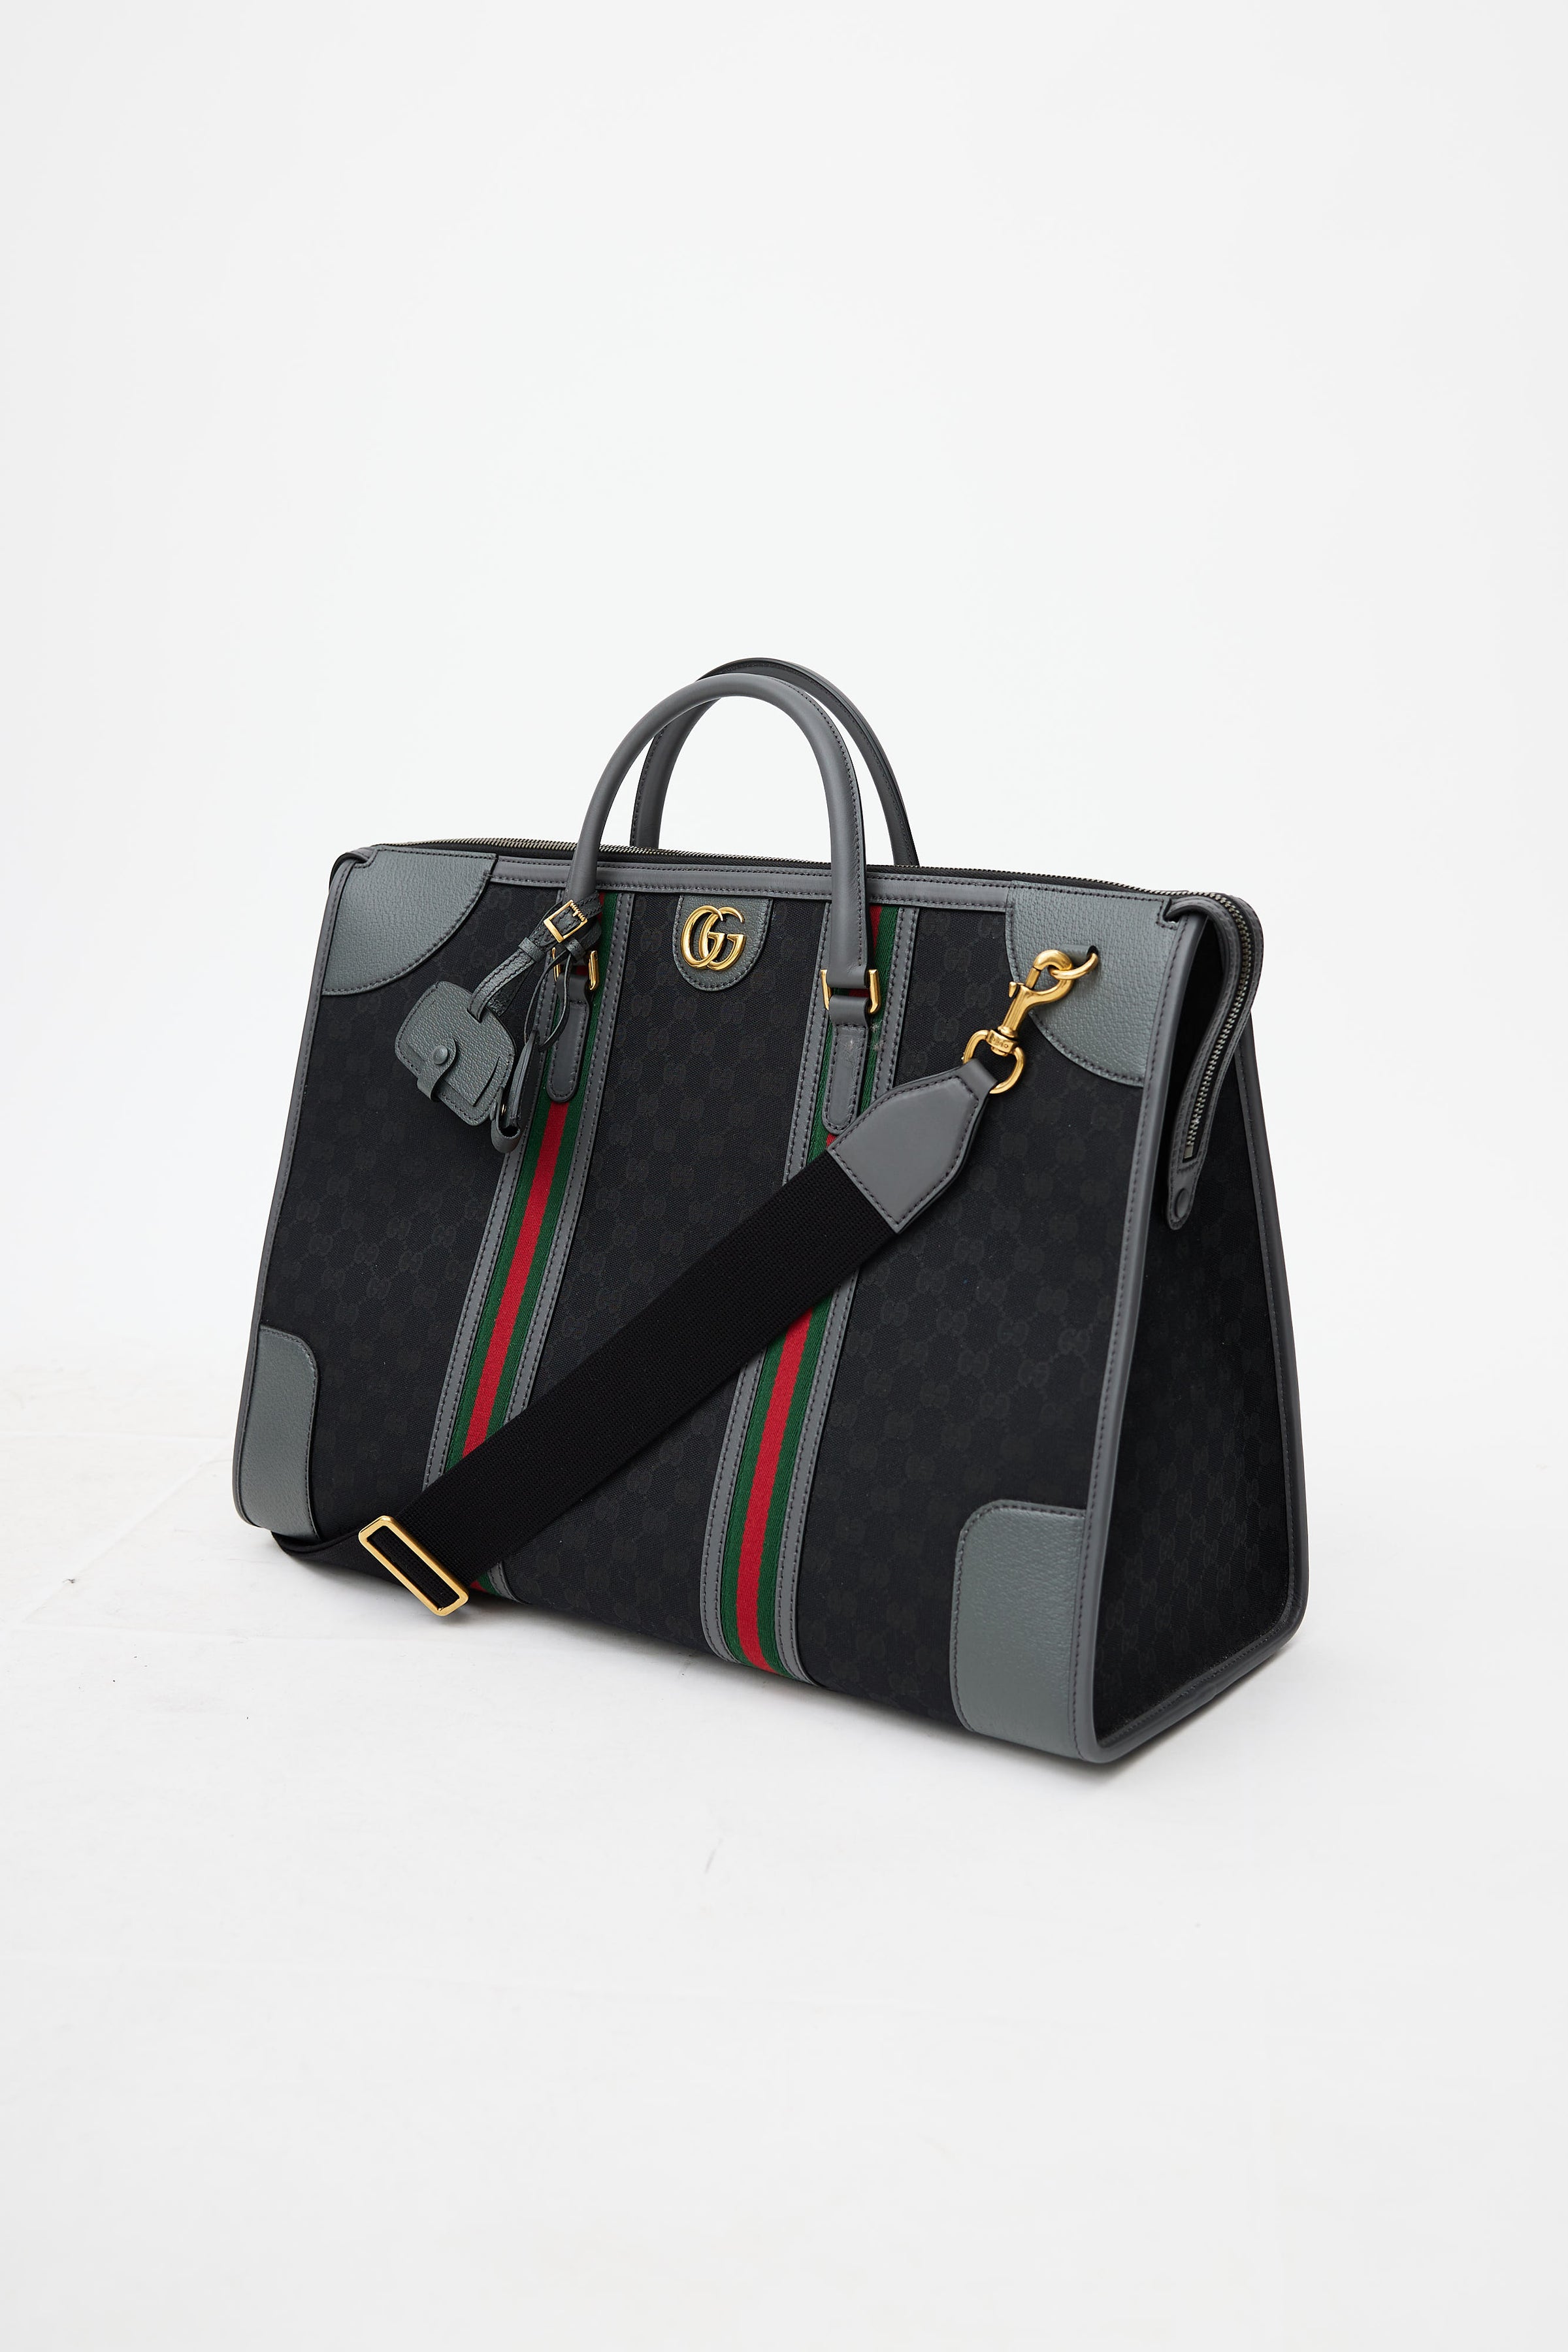 Gucci Savoy large duffle bag in beige and ebony Supreme | GUCCI® US